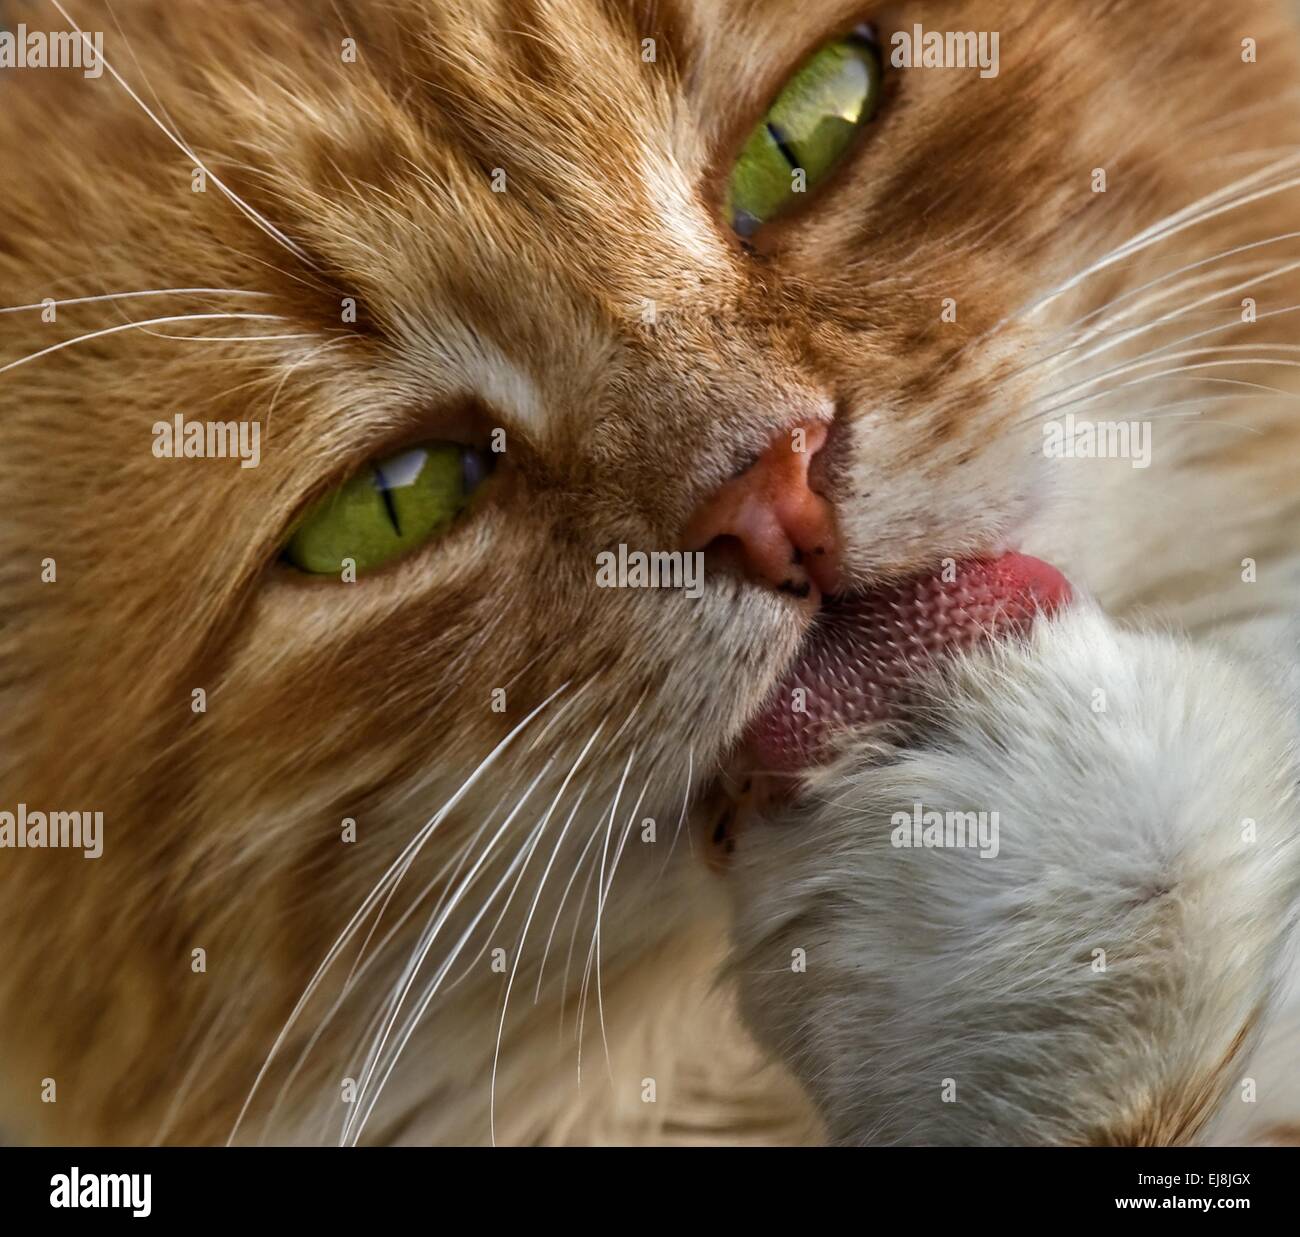 Cute cat licking its paw close up Stock Photo